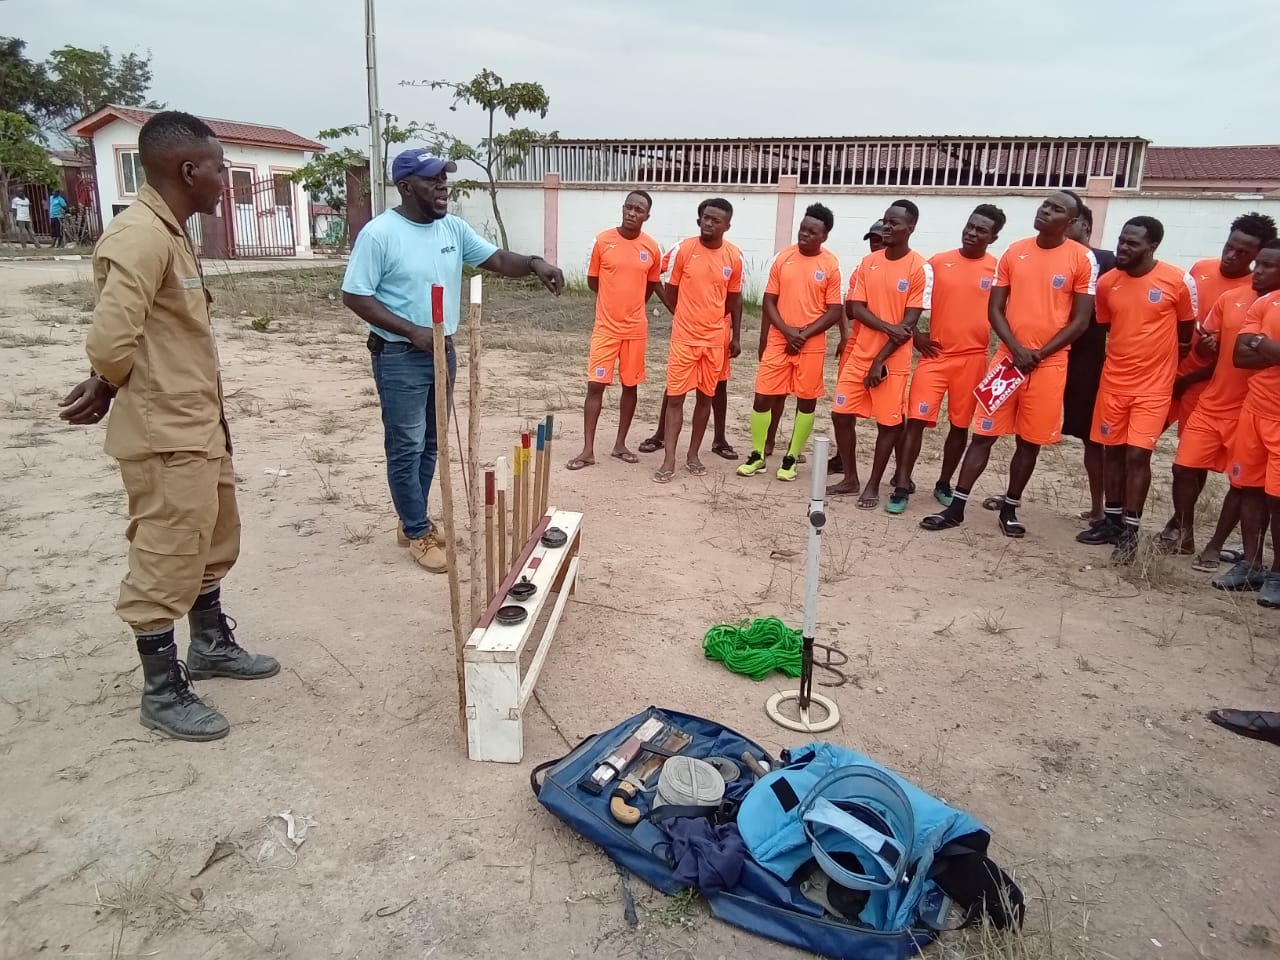 APOPO teaches Angolan soccer champions to stay safe